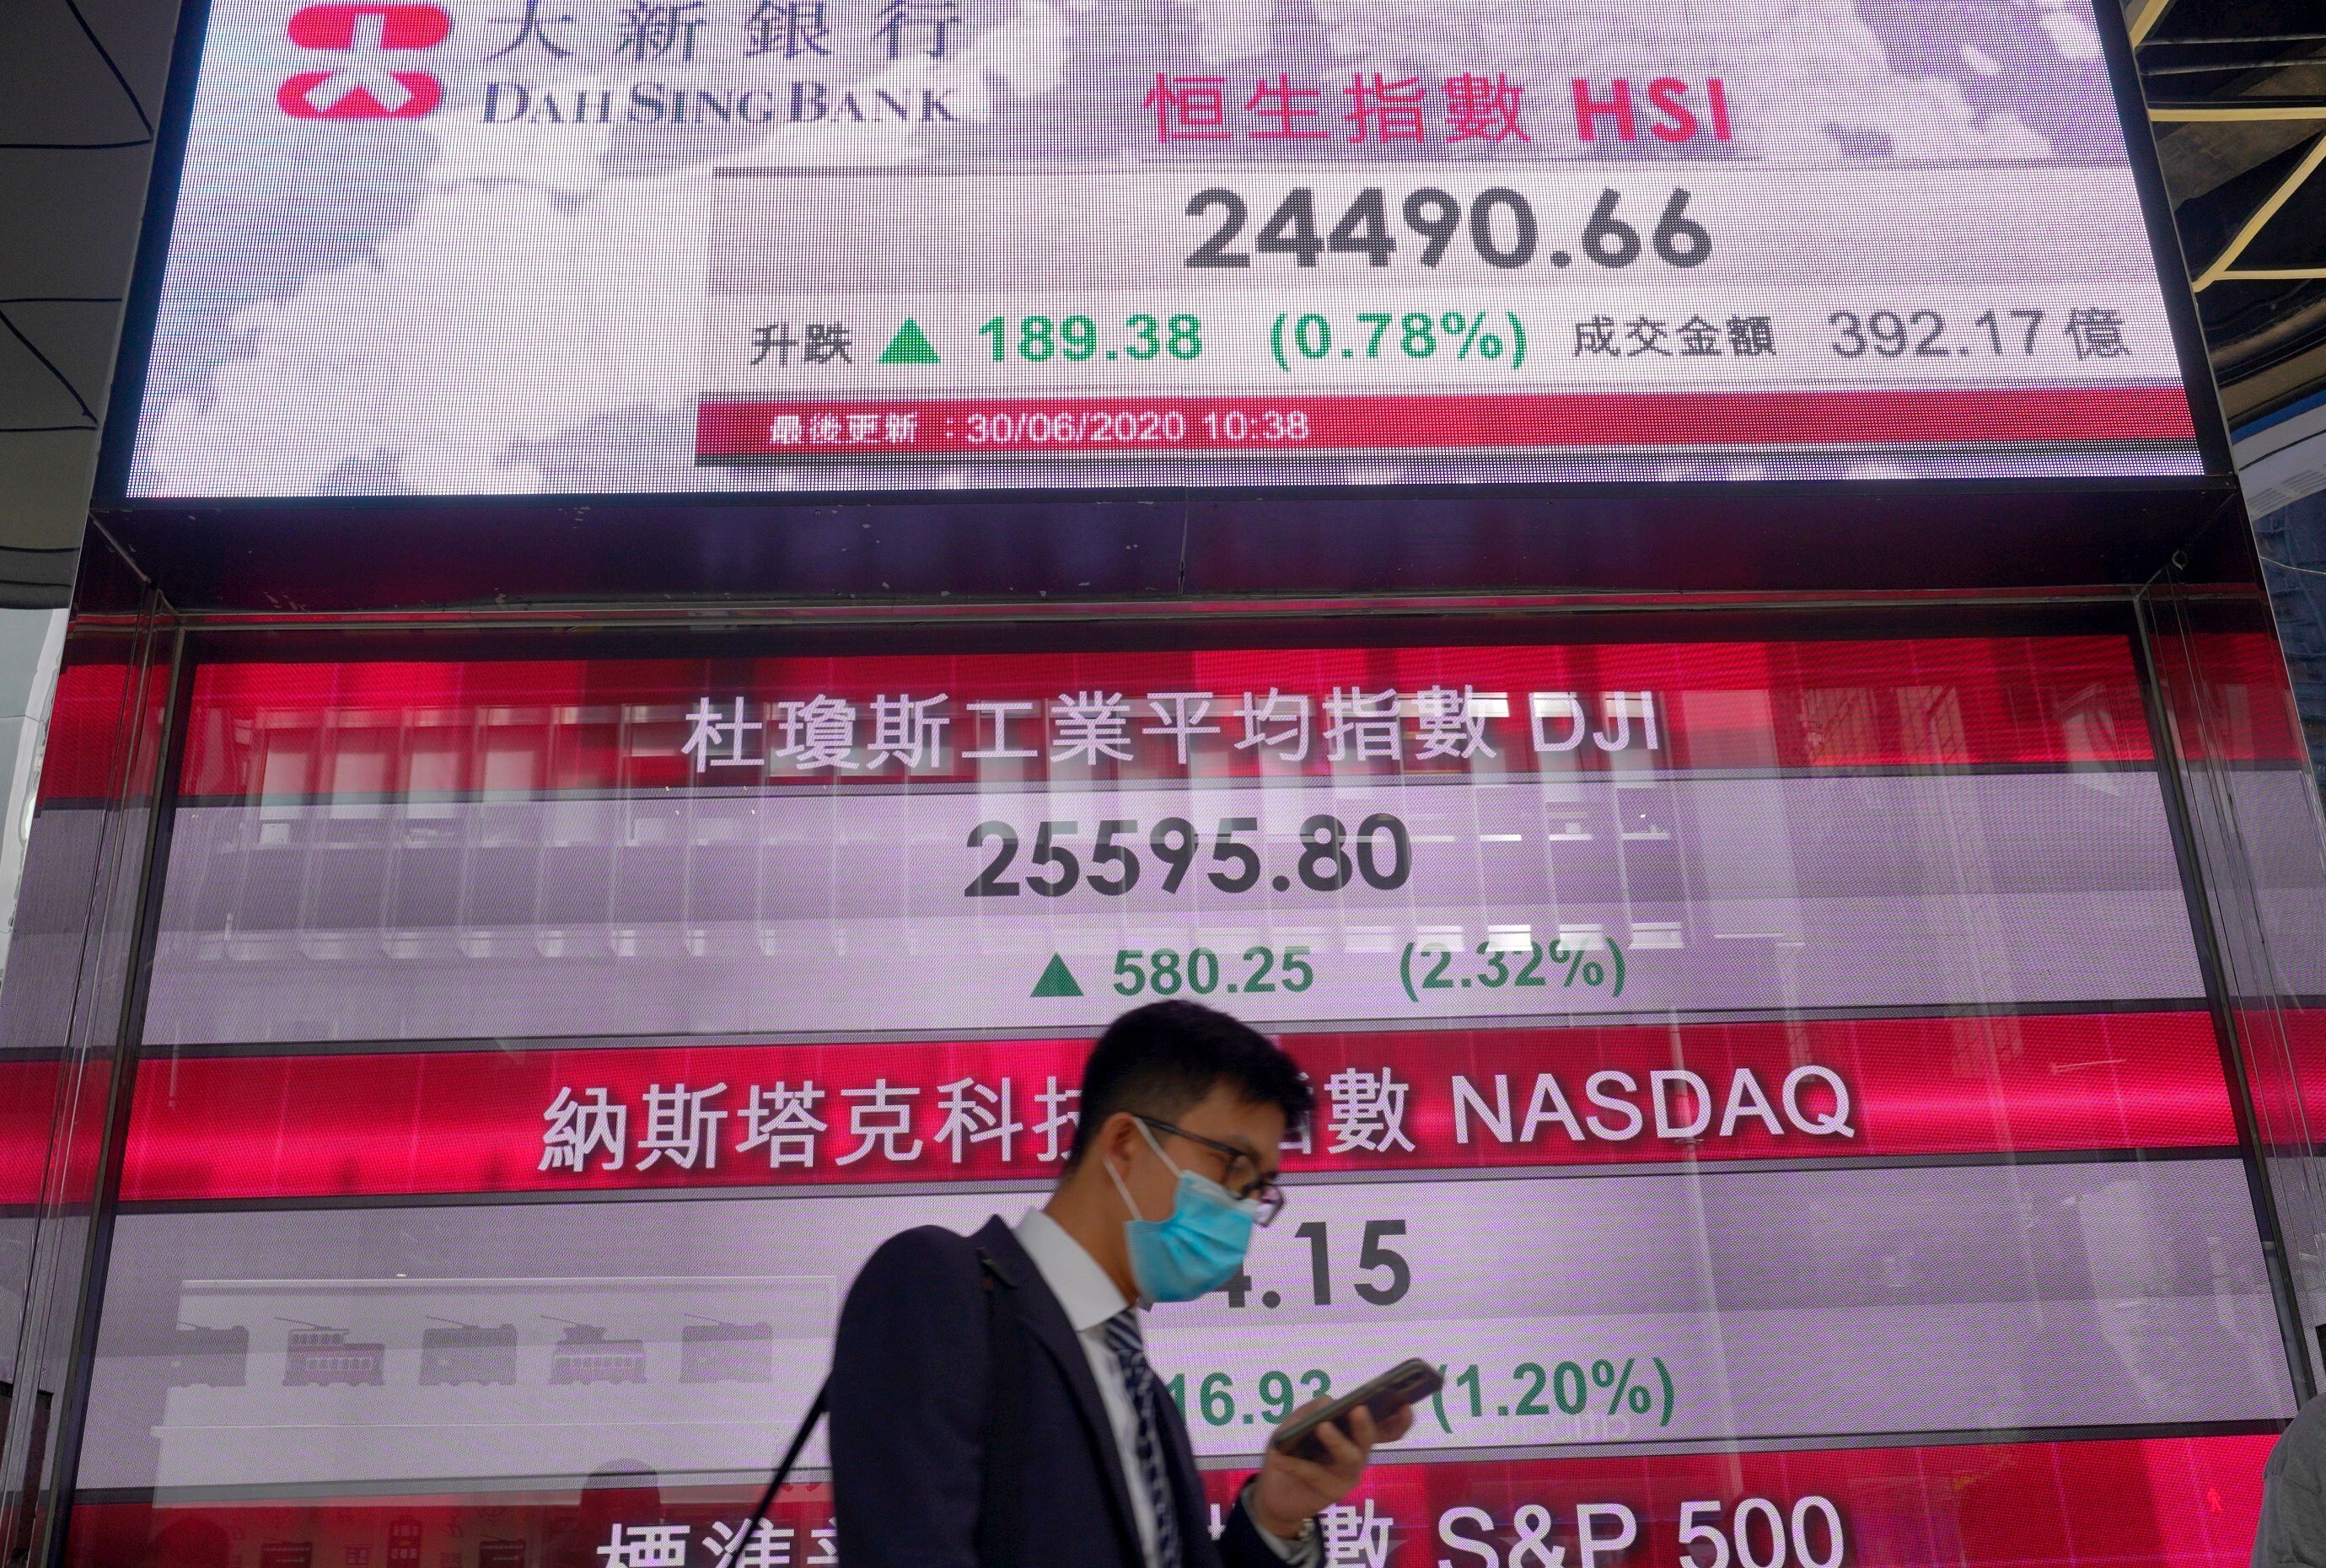 Hong Kong investors overall are optimistic, propelling the Hang Seng Index into a bull market last week. Here, a man walks past a bank's electronic board at Hong Kong Stock Exchange on June 30, 2020. Photo: Associated Press